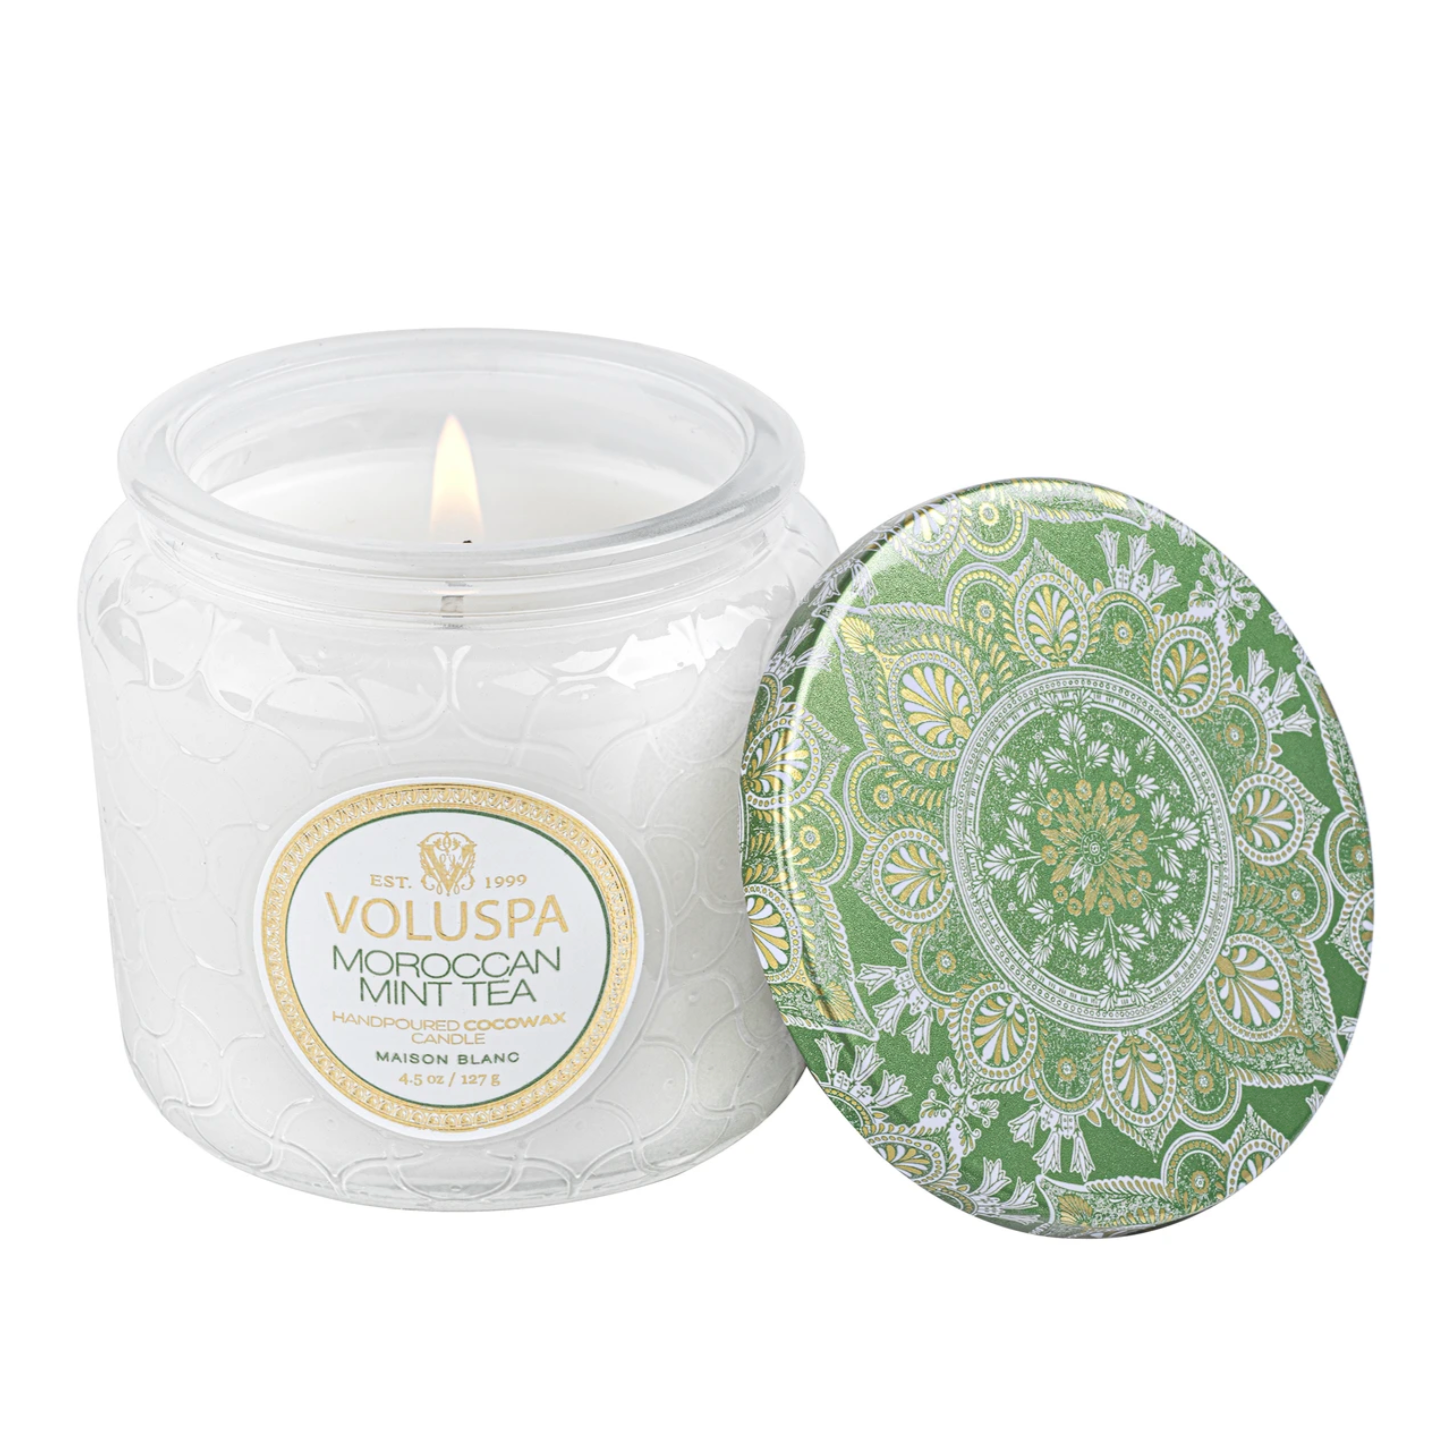 Small white candle with green and gold patterned lid tilted against the candle.